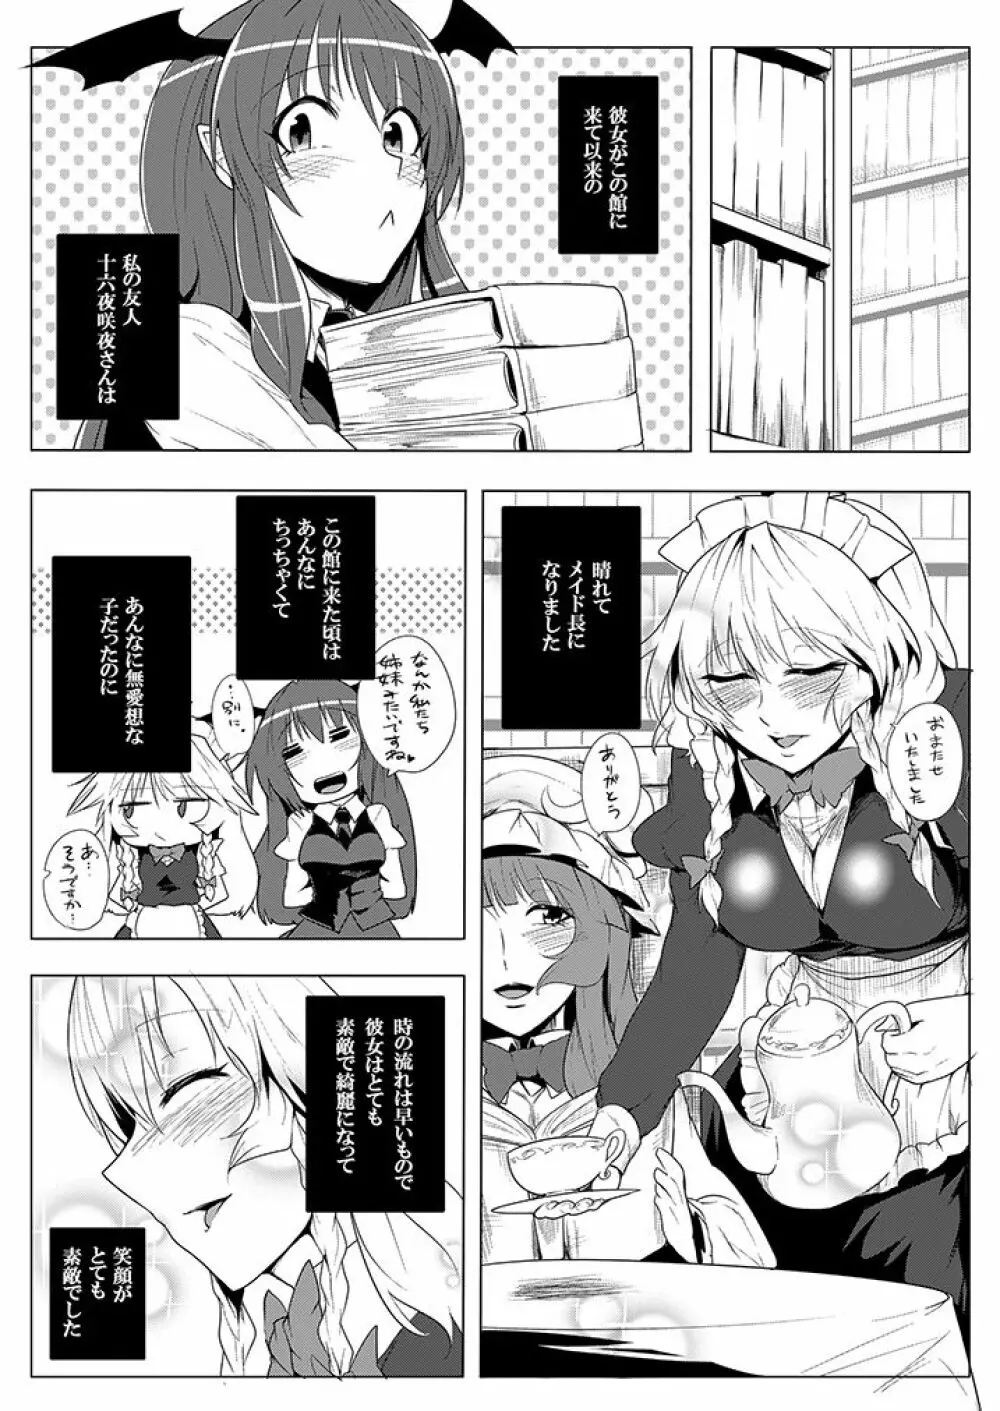 SAKUYA MAID in HEAVEN/ALL IN 1 - page8